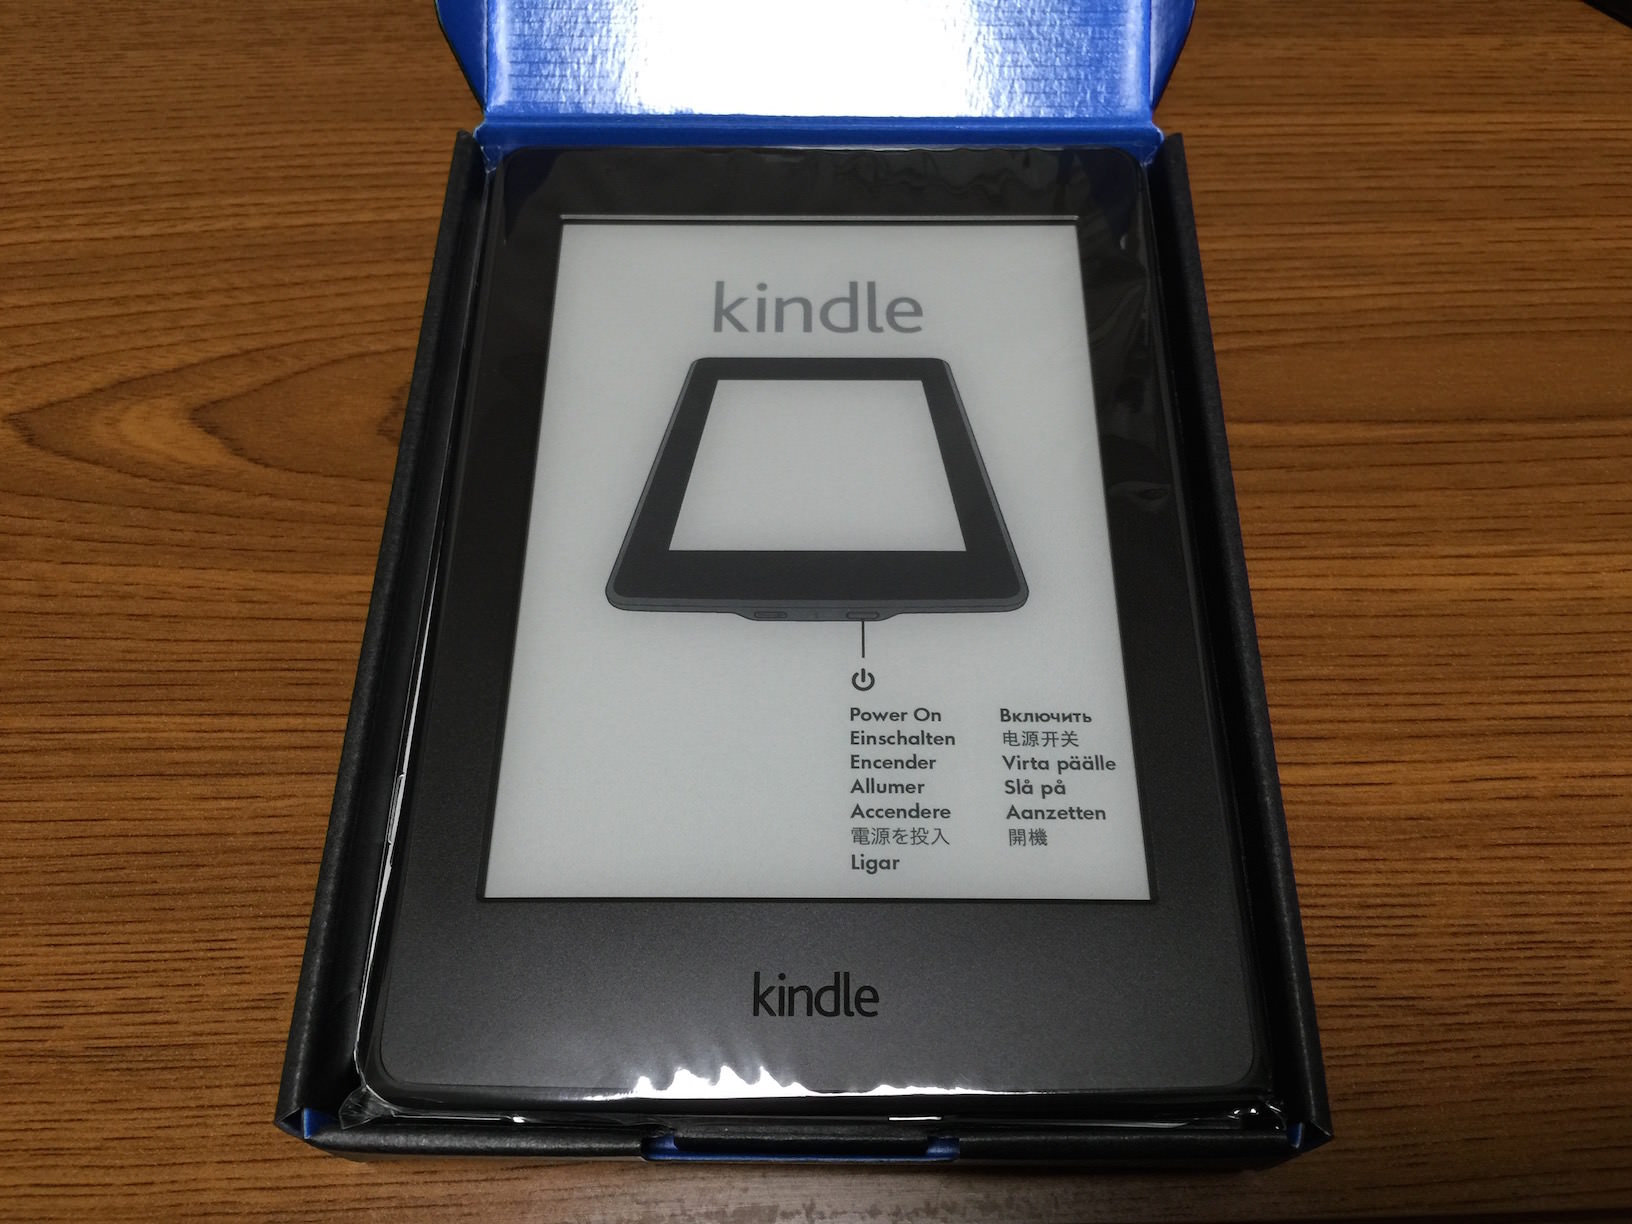 Kindle paperwhite new model 2015 review 2